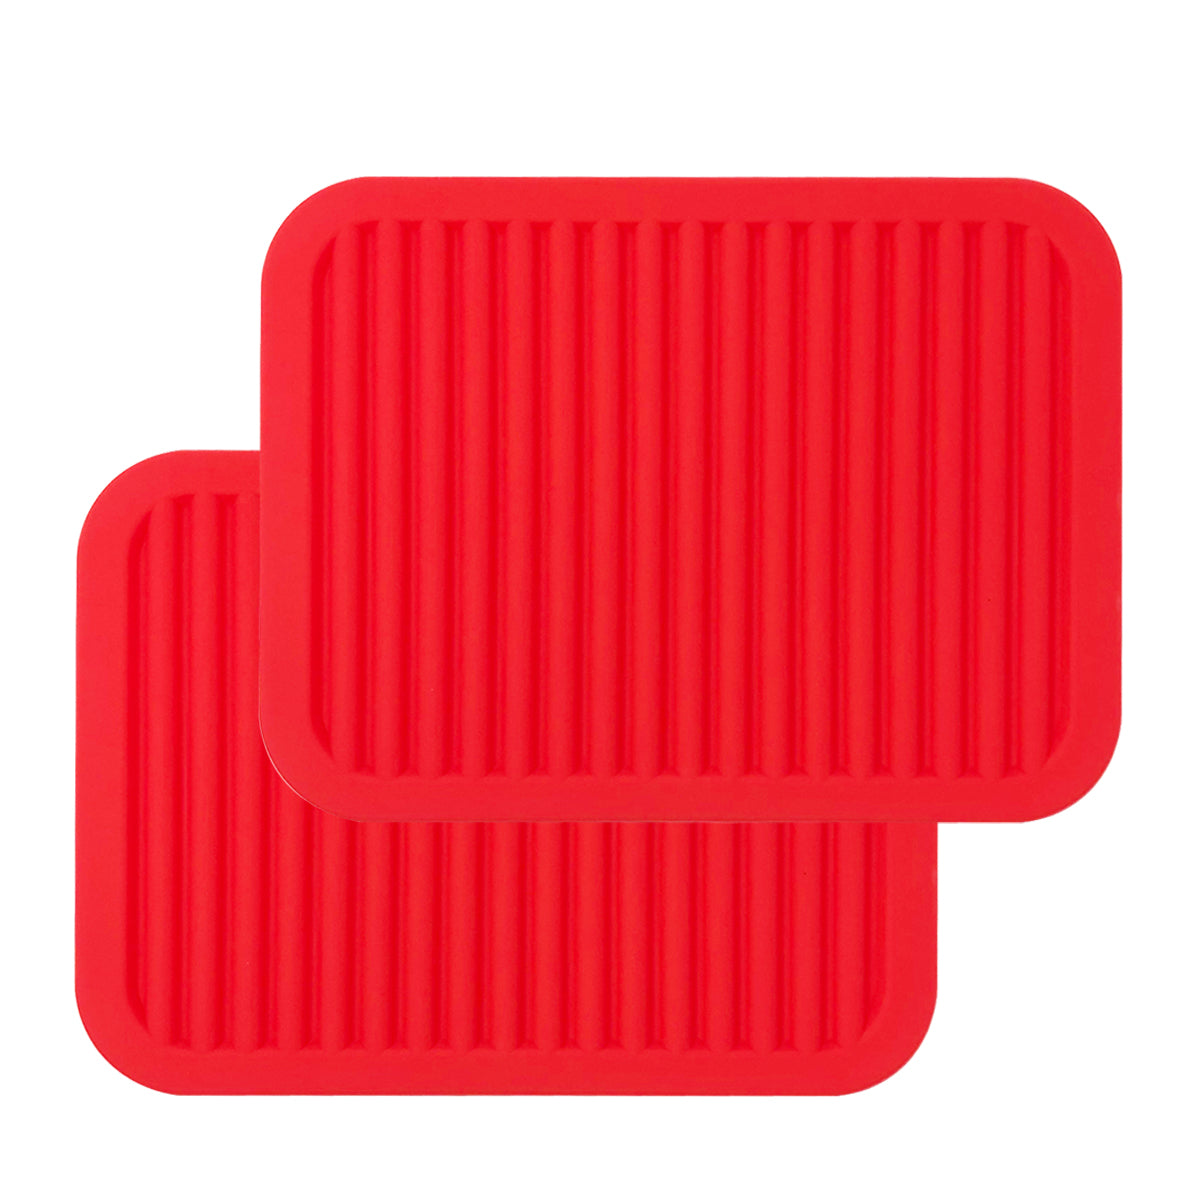 Wrapables Silicone Trivet, Multi-use Durable Flexible Non-Slip Insulated Silicone Mat (Set of 2)